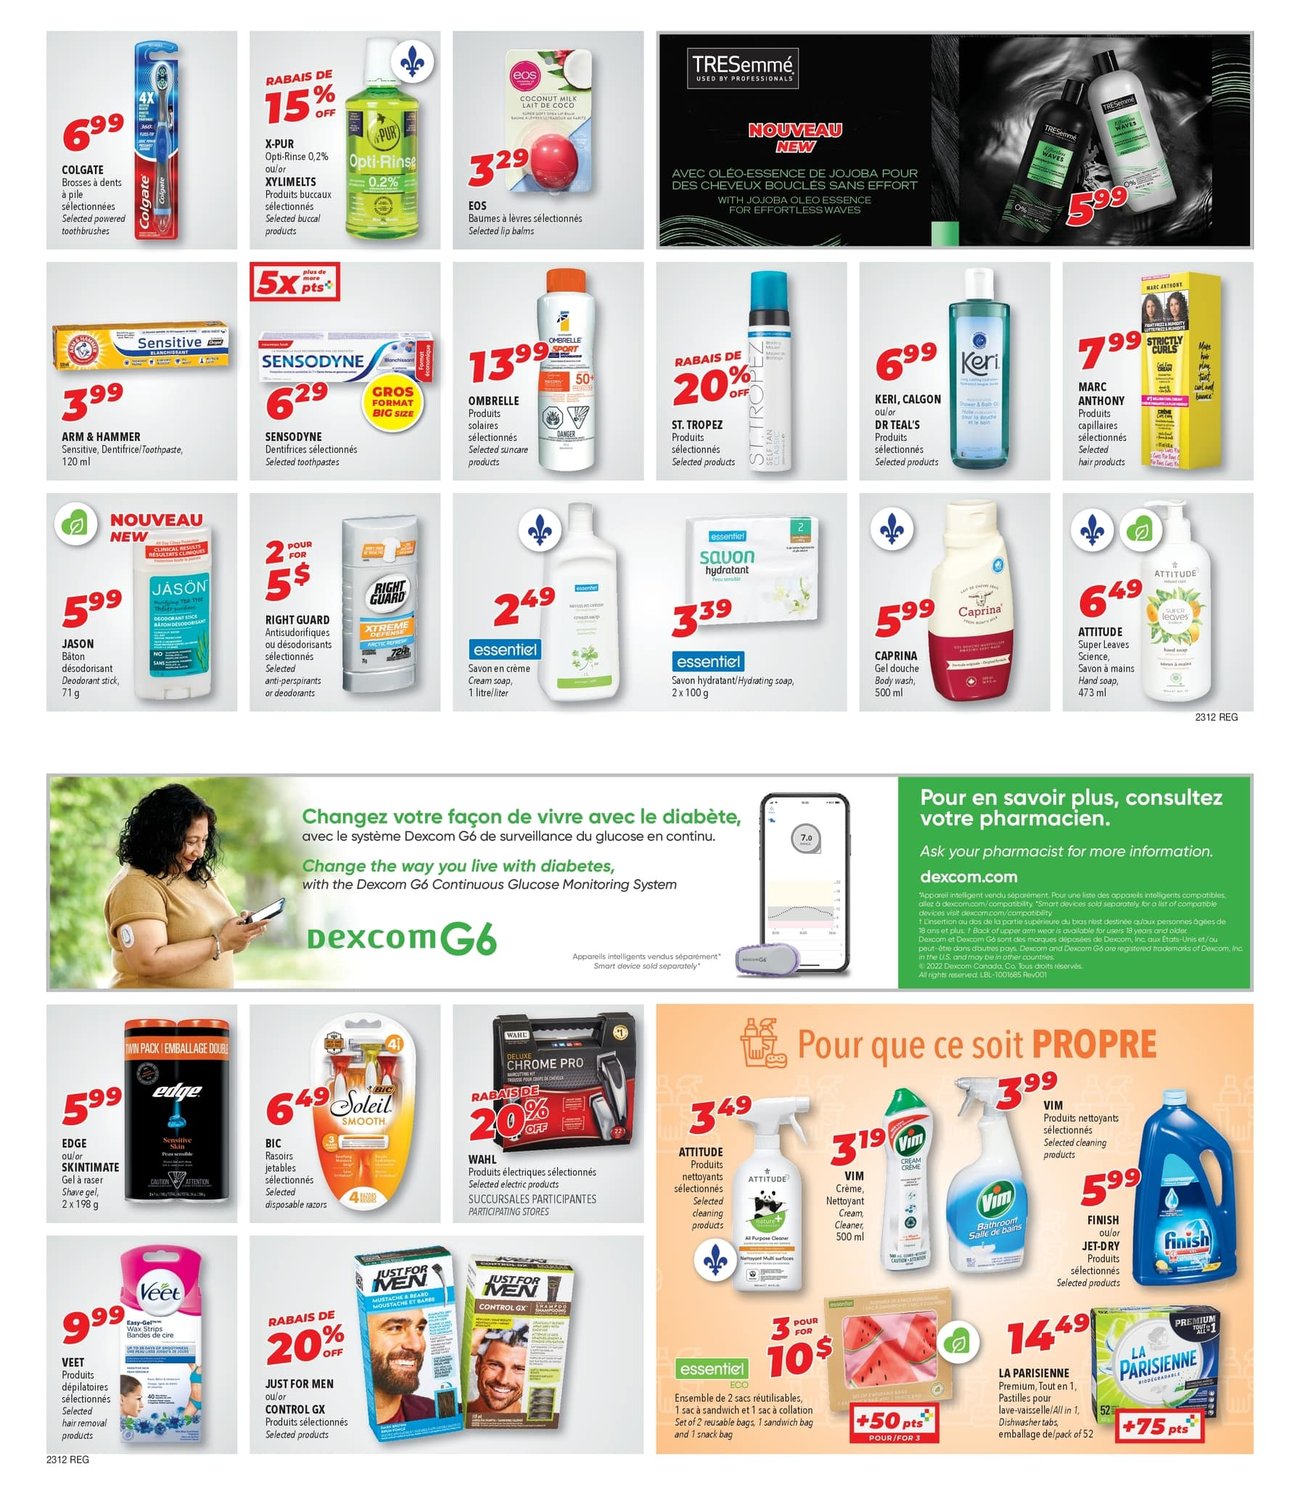 Familiprix - Weekly Flyer Specials - Page 13